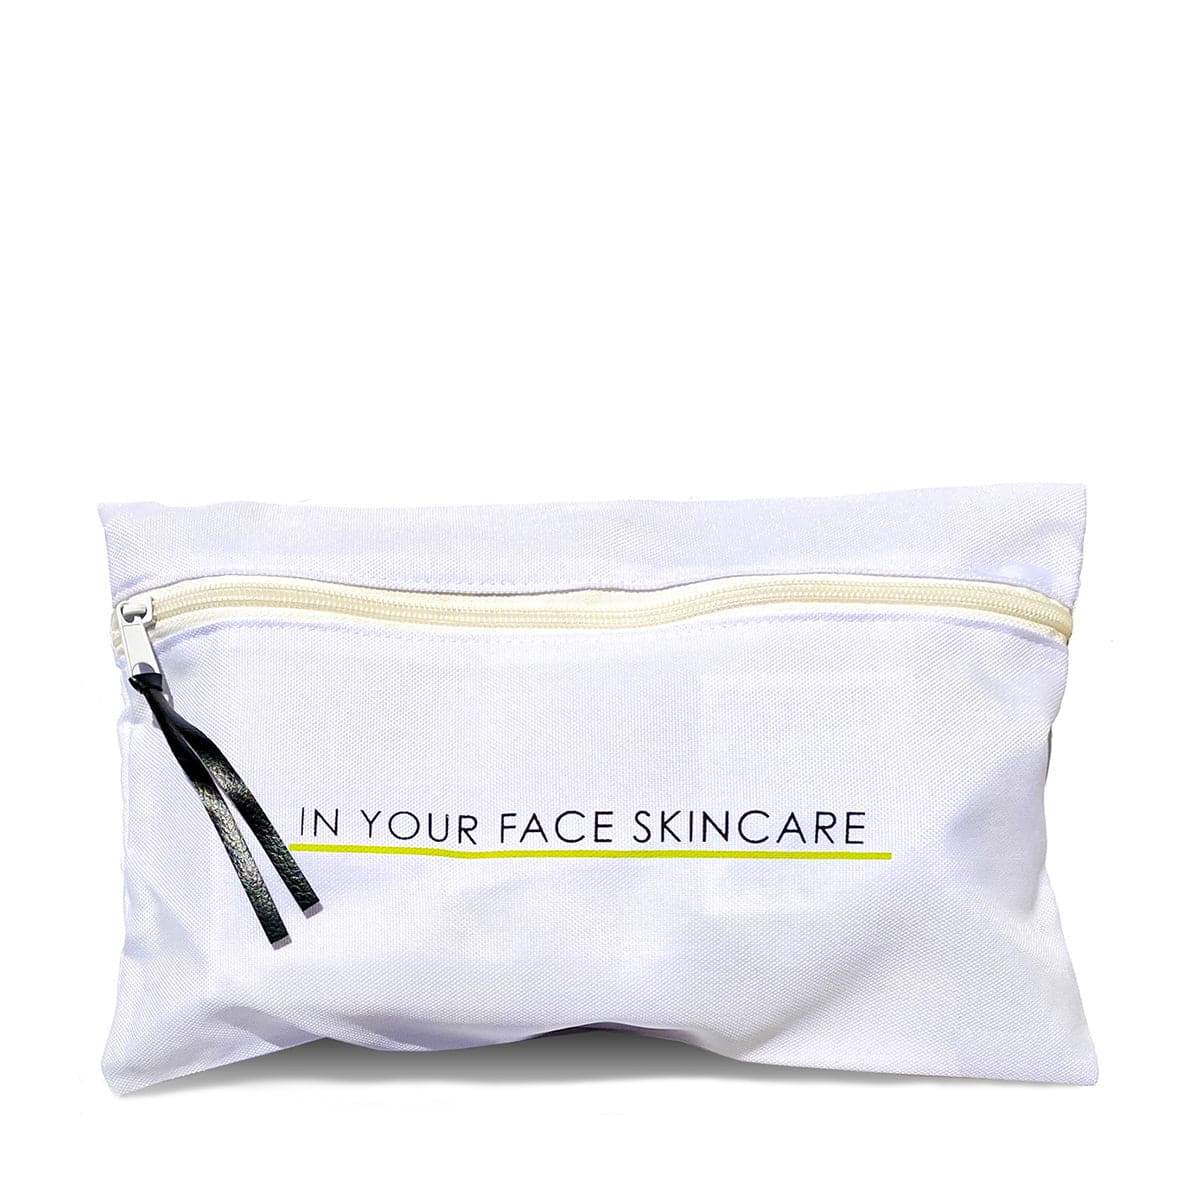 an image of a white rectangular zippered makeup bag on a white background that says "IN YOUR FACE SKINCARE"